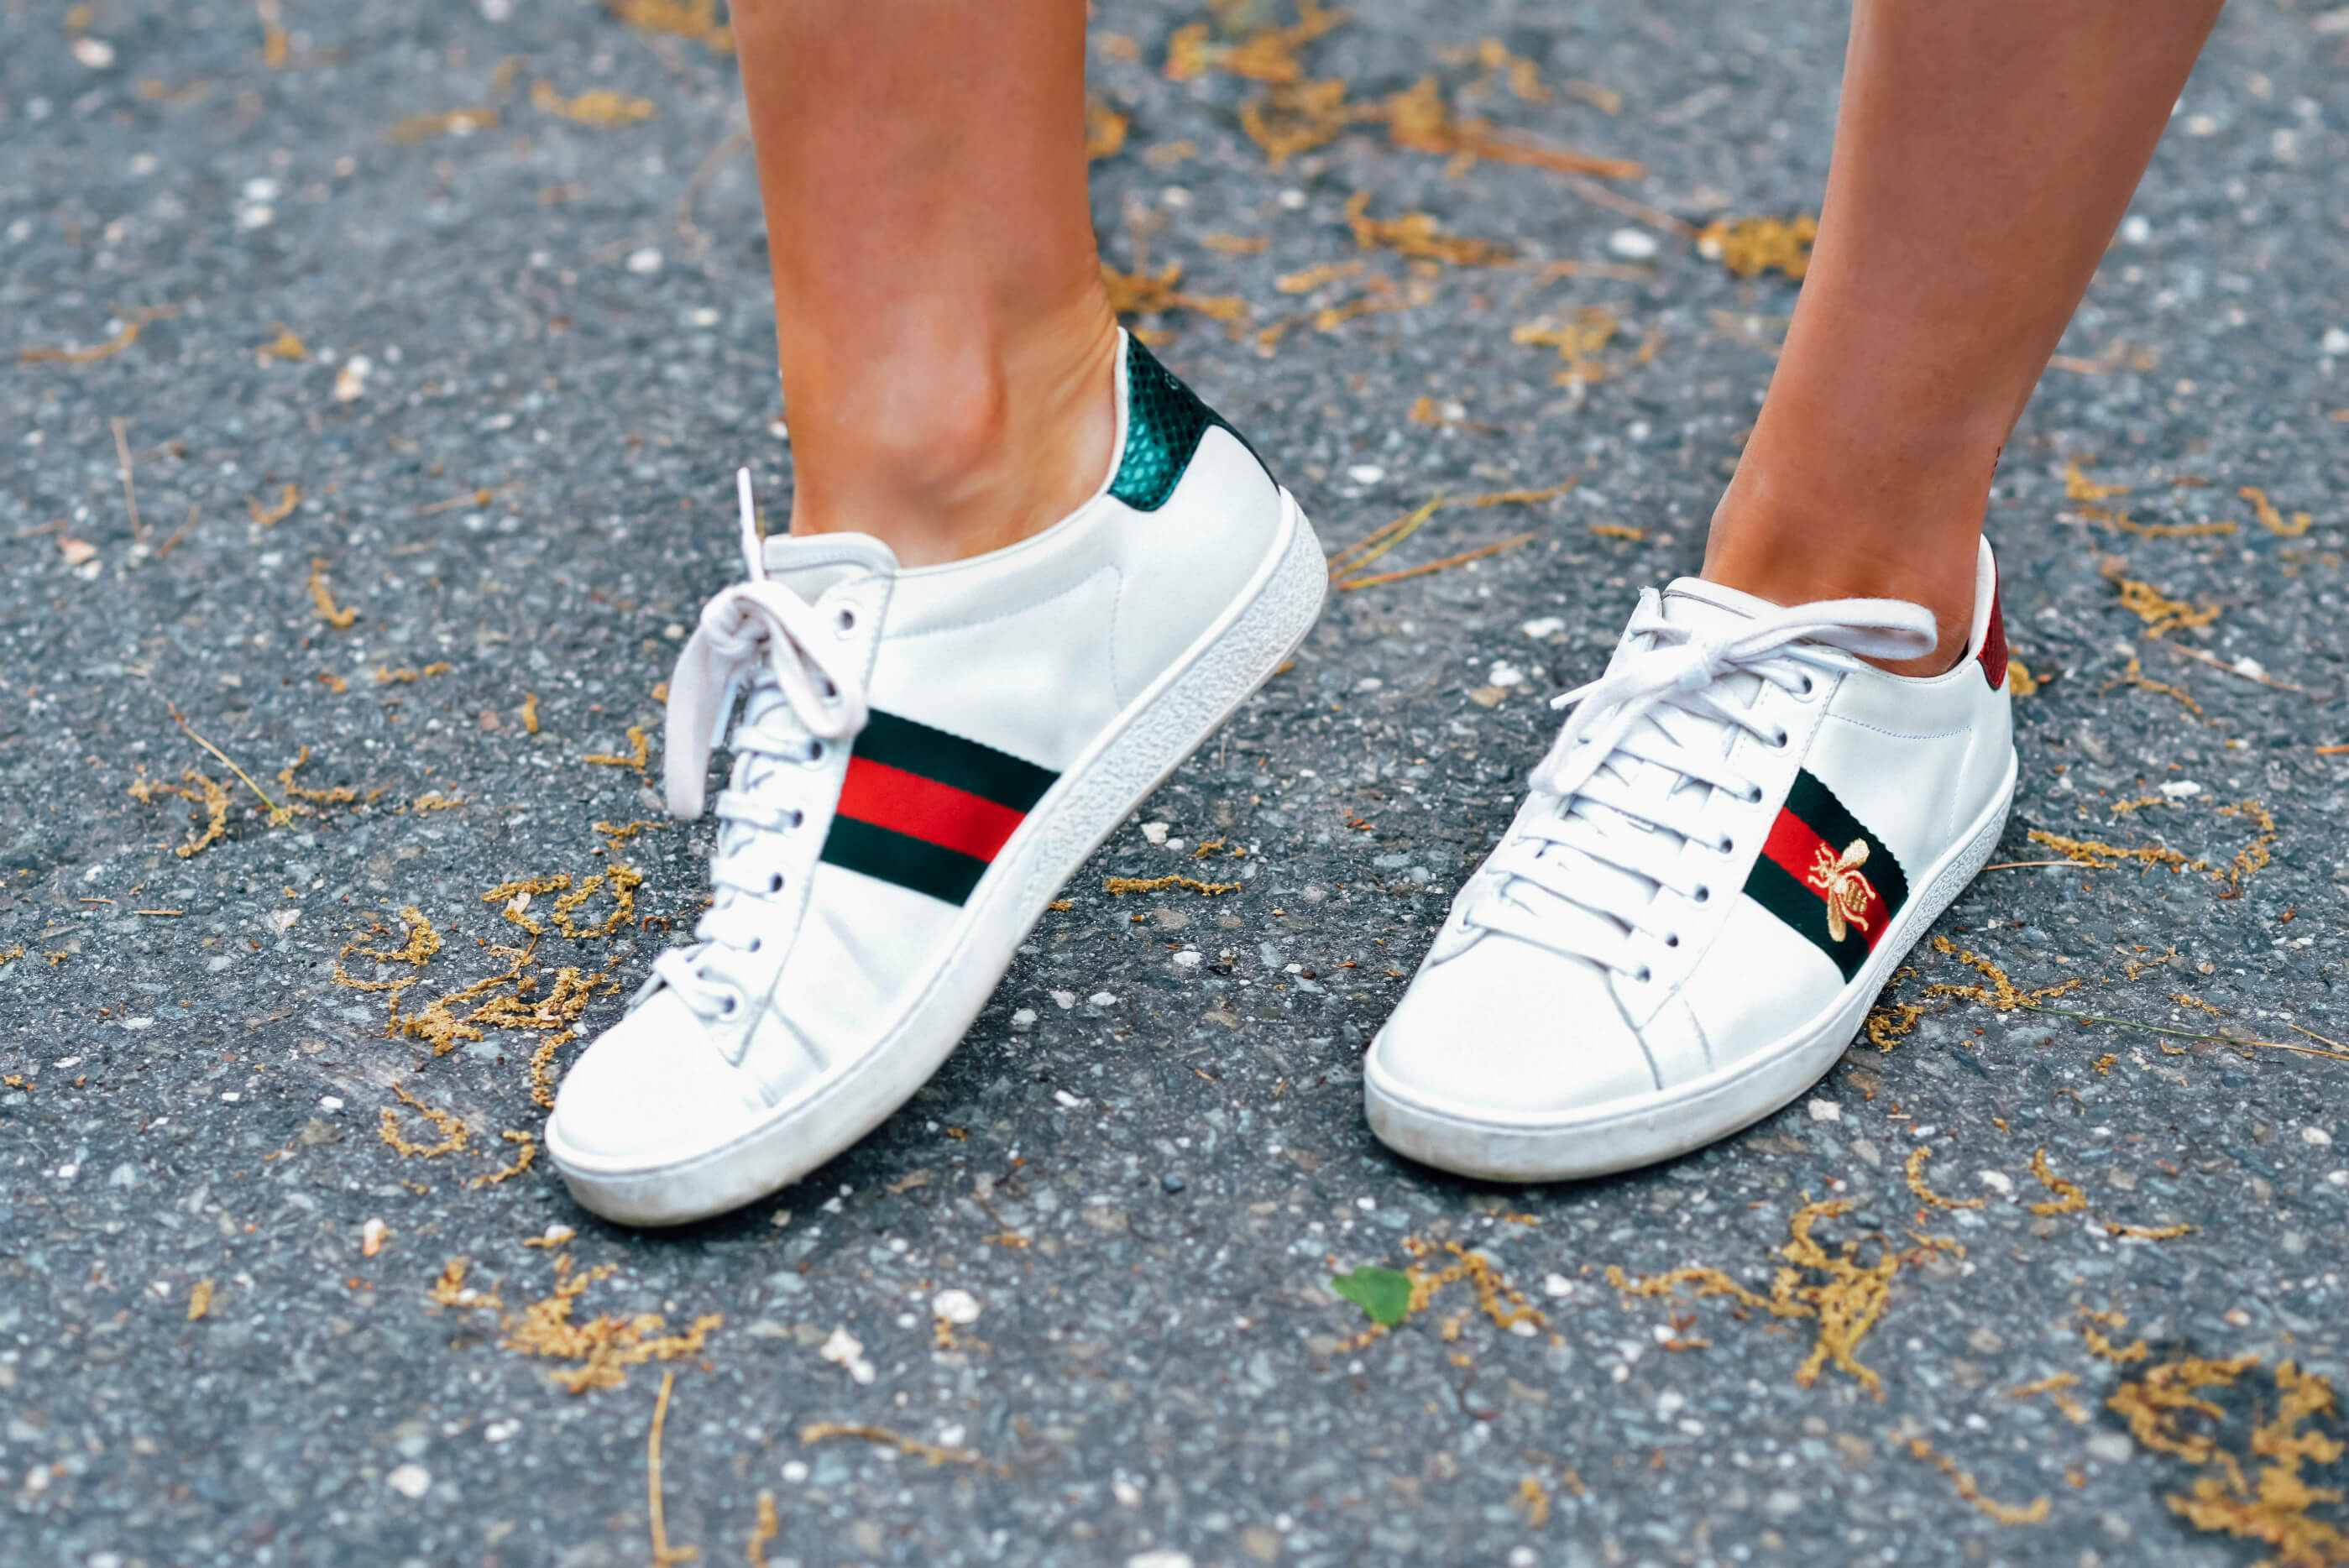 Gucci Ace Sneakers, Tilden of To Be Bright